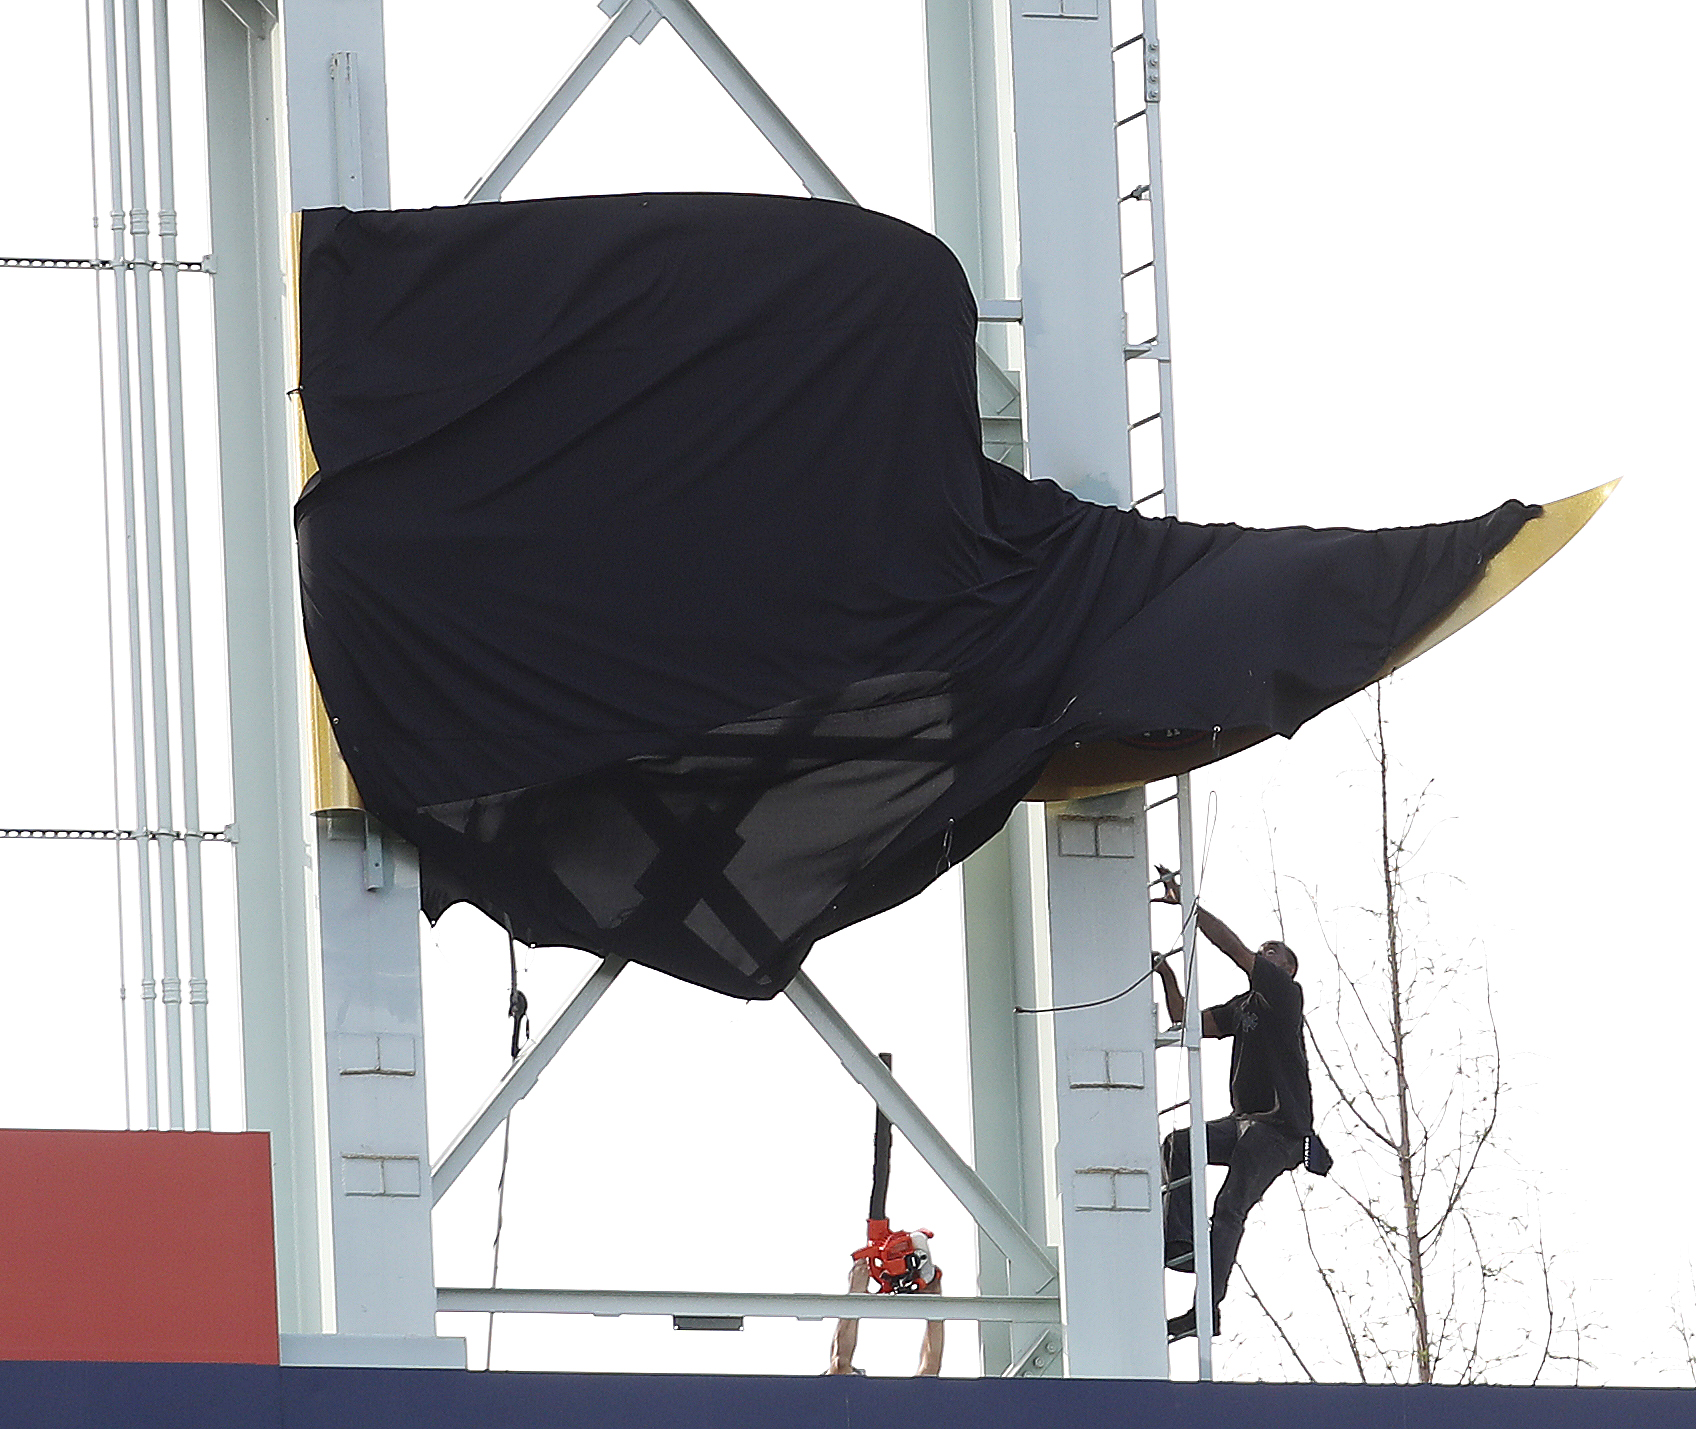 Leaf blower, brave employee save Astros' World Series banner unveiling